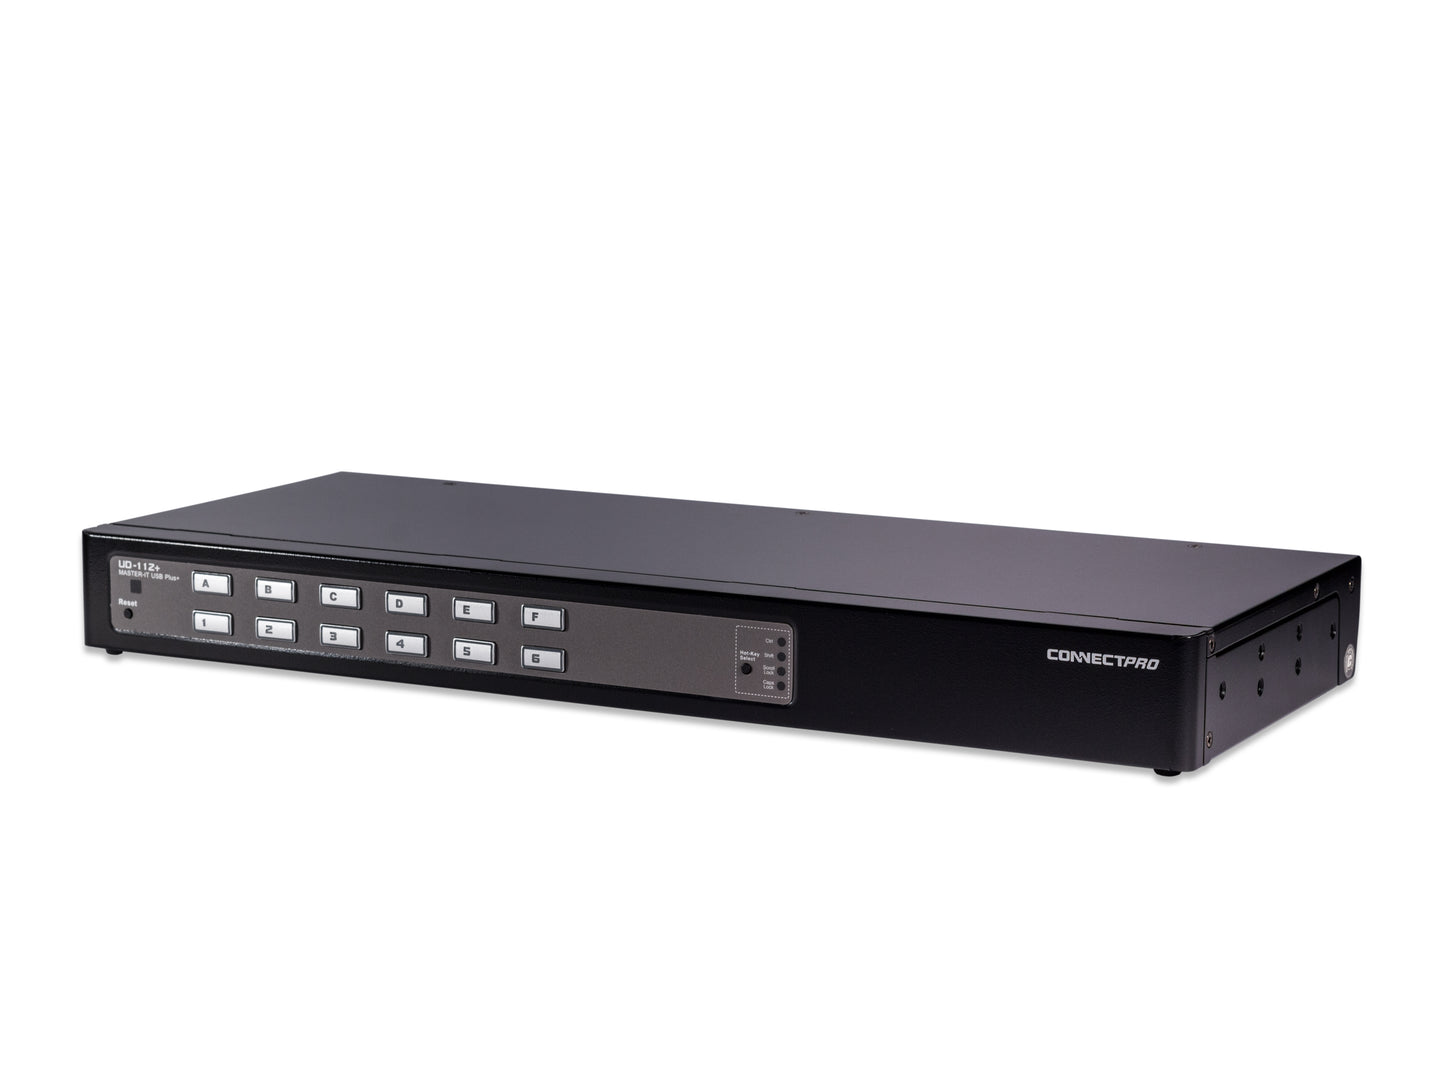 UD-112 DVI-D KVM switch for 1 Monitor and 12 Computers